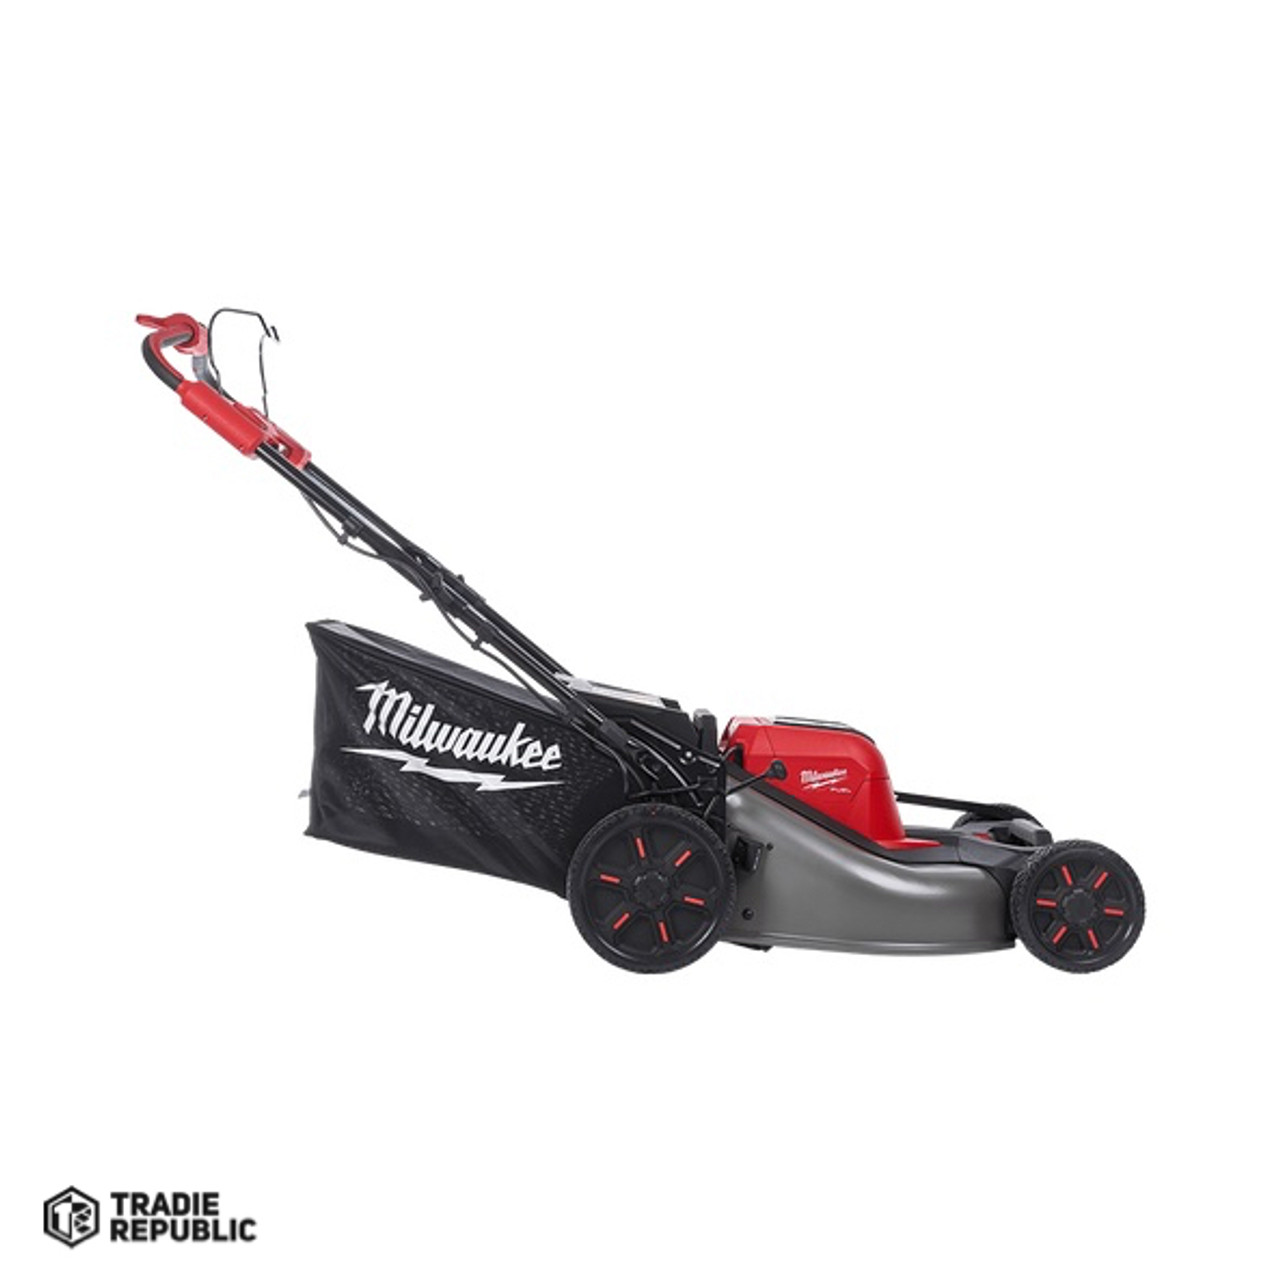 M18F2LM210 Milwaukee 36V M18 Fuel 533mm Self-Propelled Dual Battery Lawn Mower